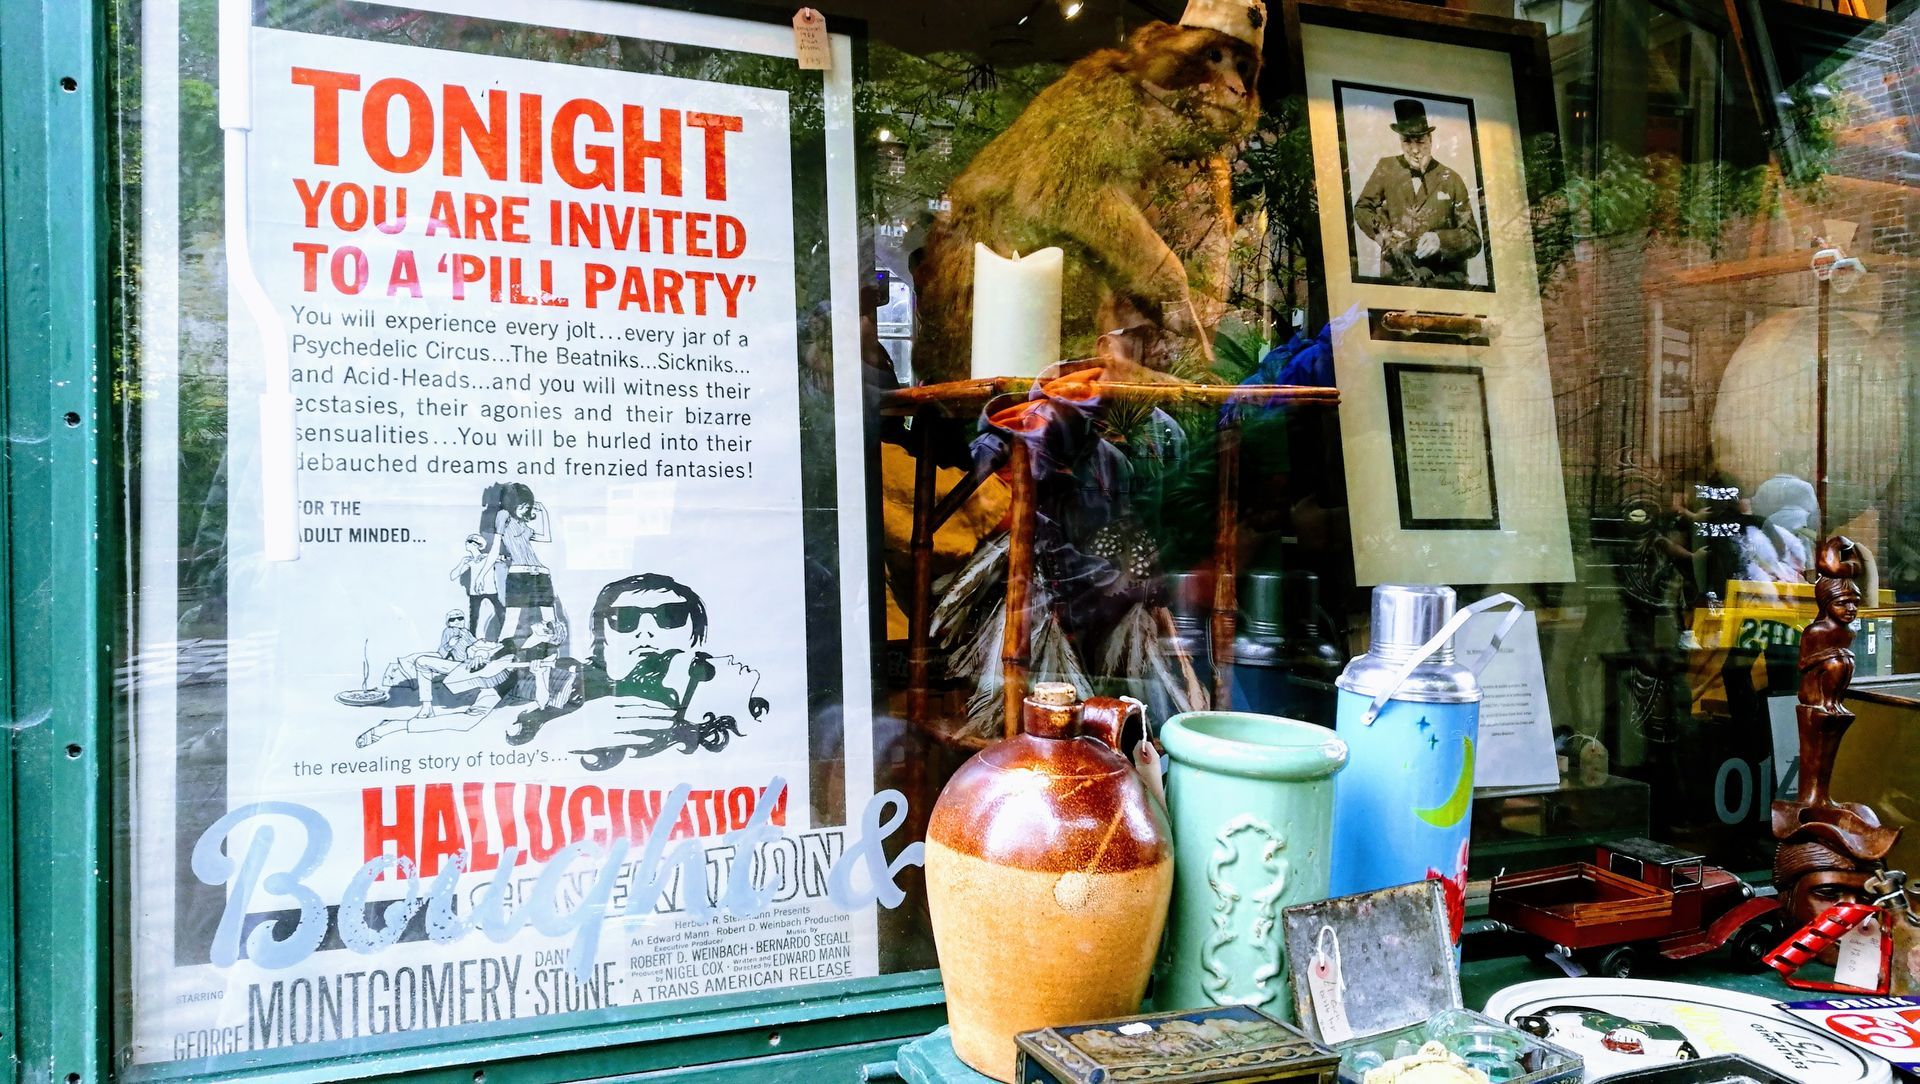 a poster in a window that says tonight you are invited to a pill party